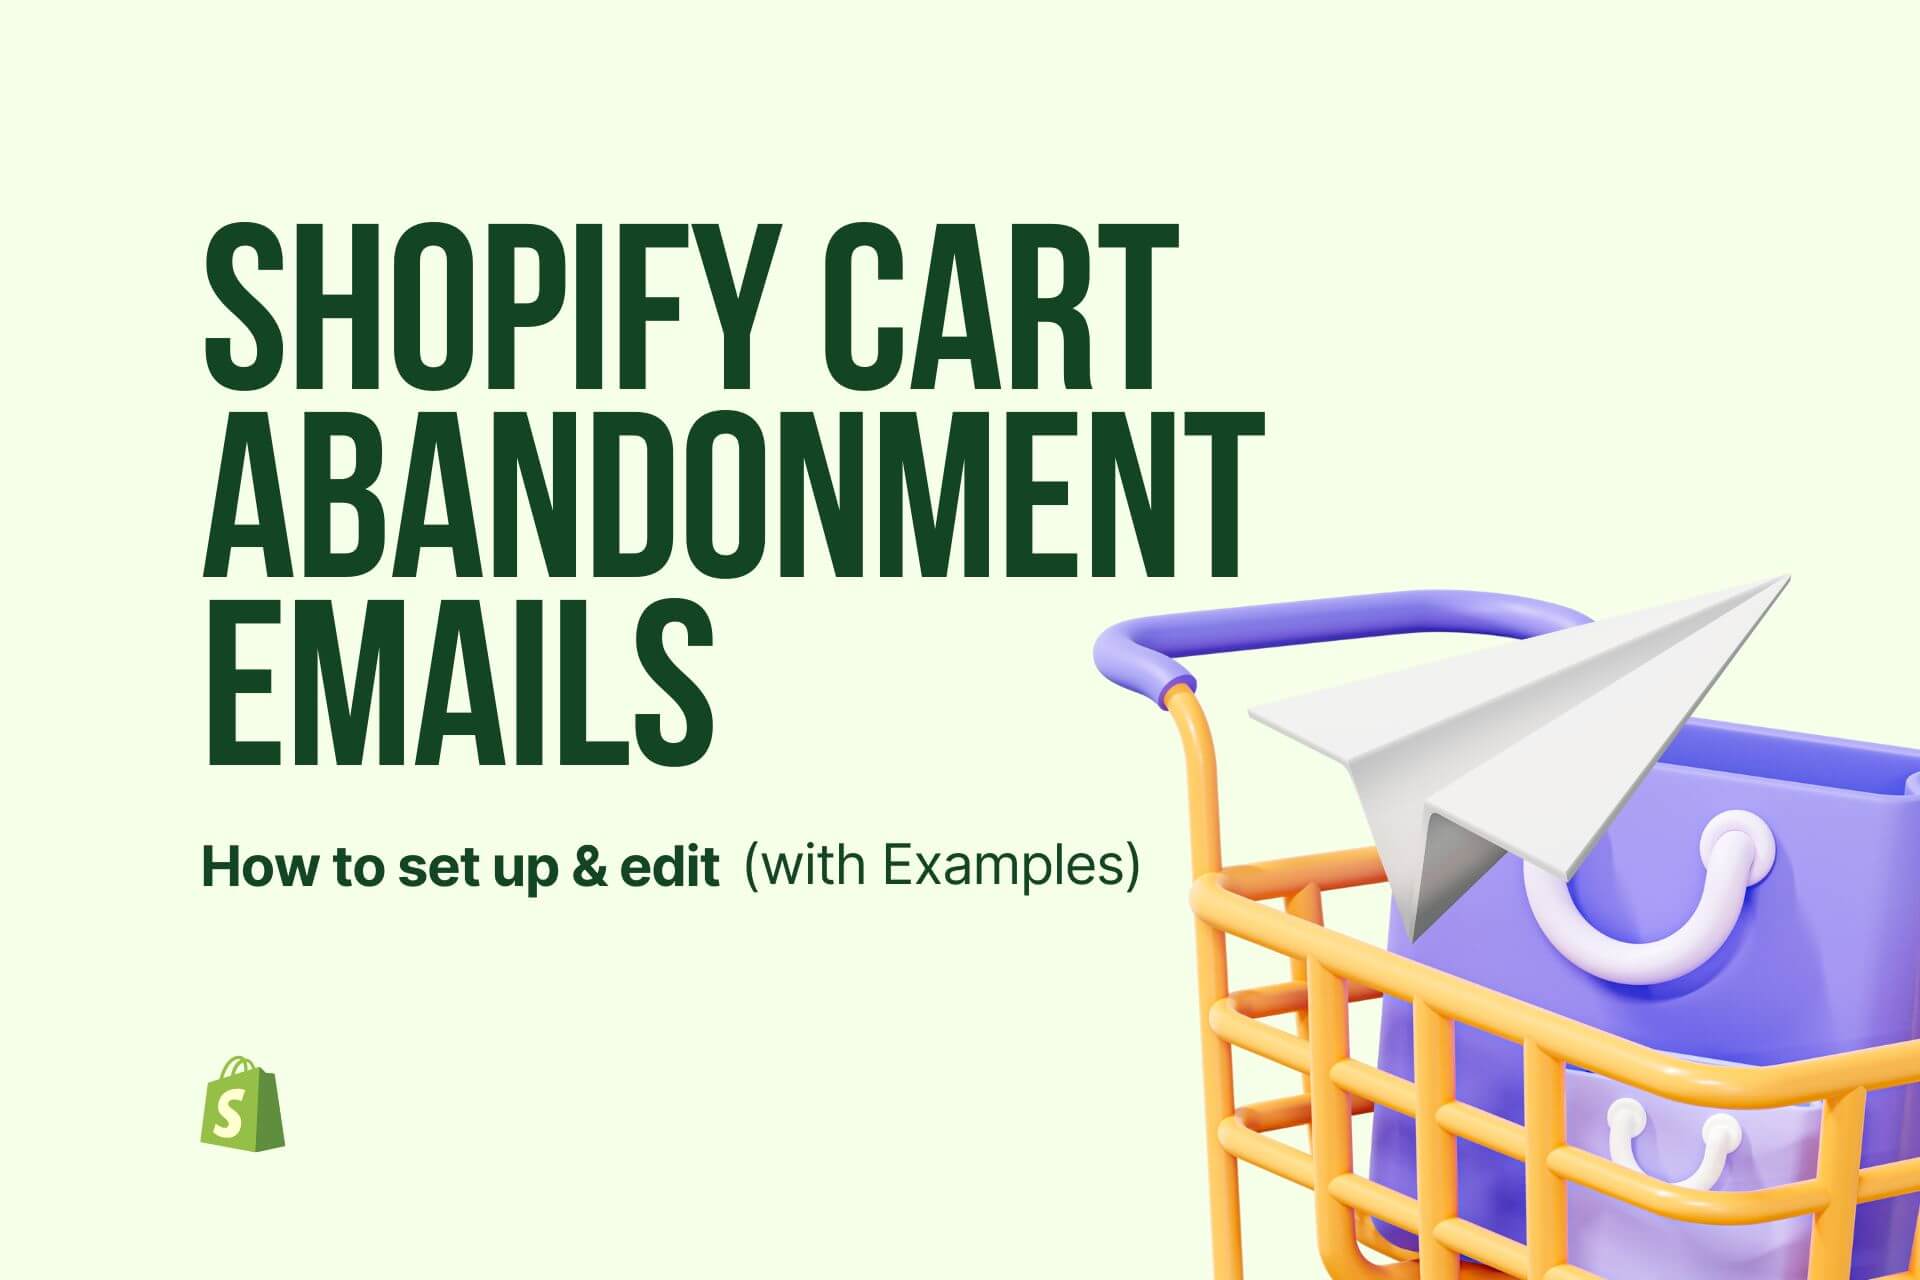 Shopify Cart Abandonment Emails: How to Set Up & Edit (with Examples)